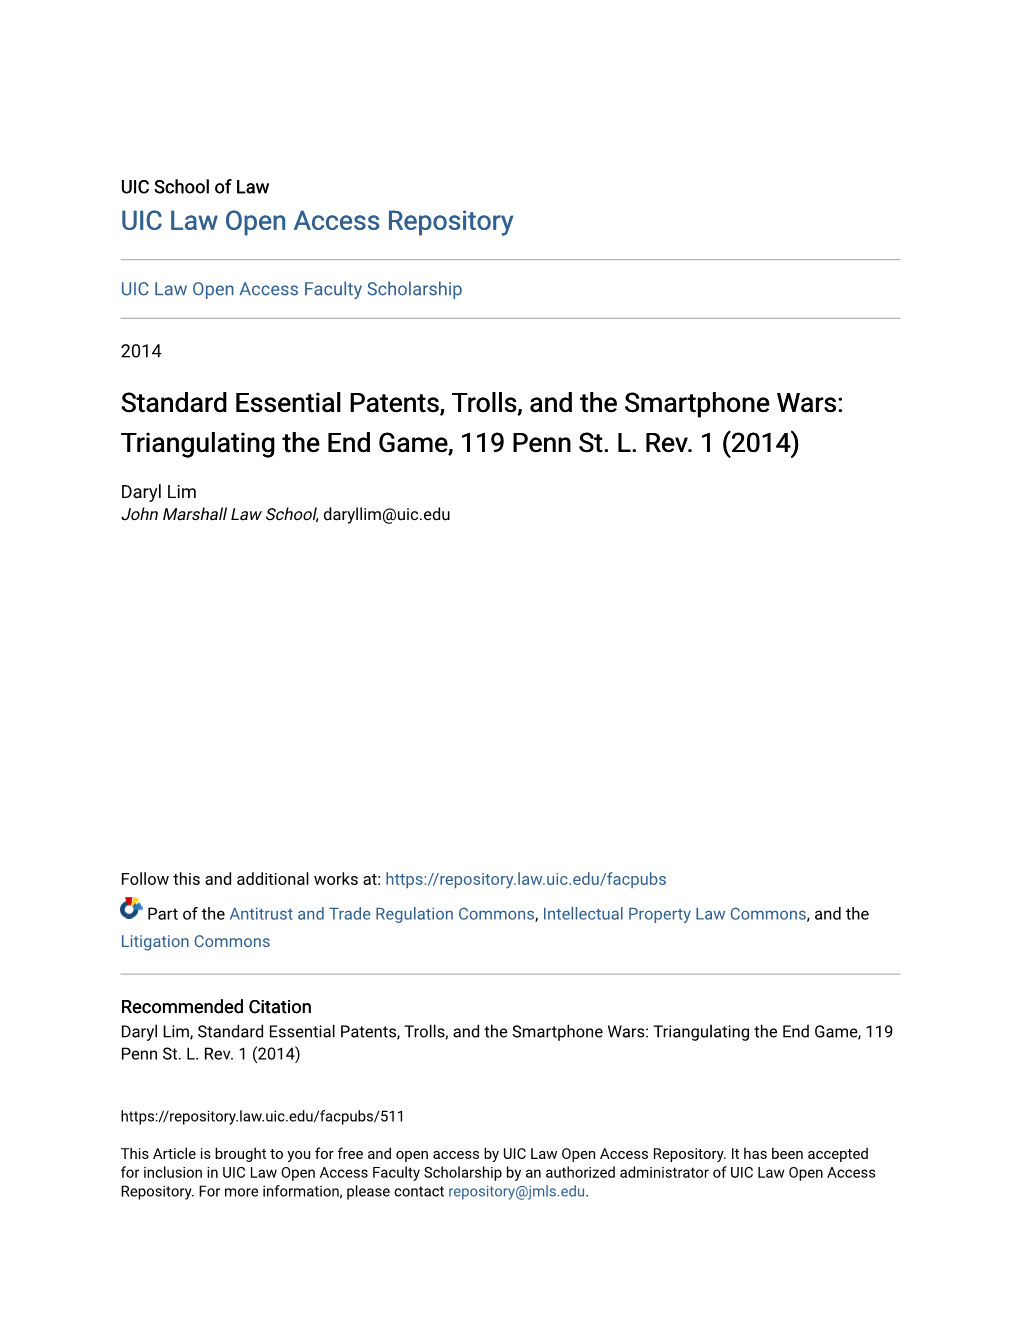 Standard Essential Patents, Trolls, and the Smartphone Wars: Triangulating the End Game, 119 Penn St